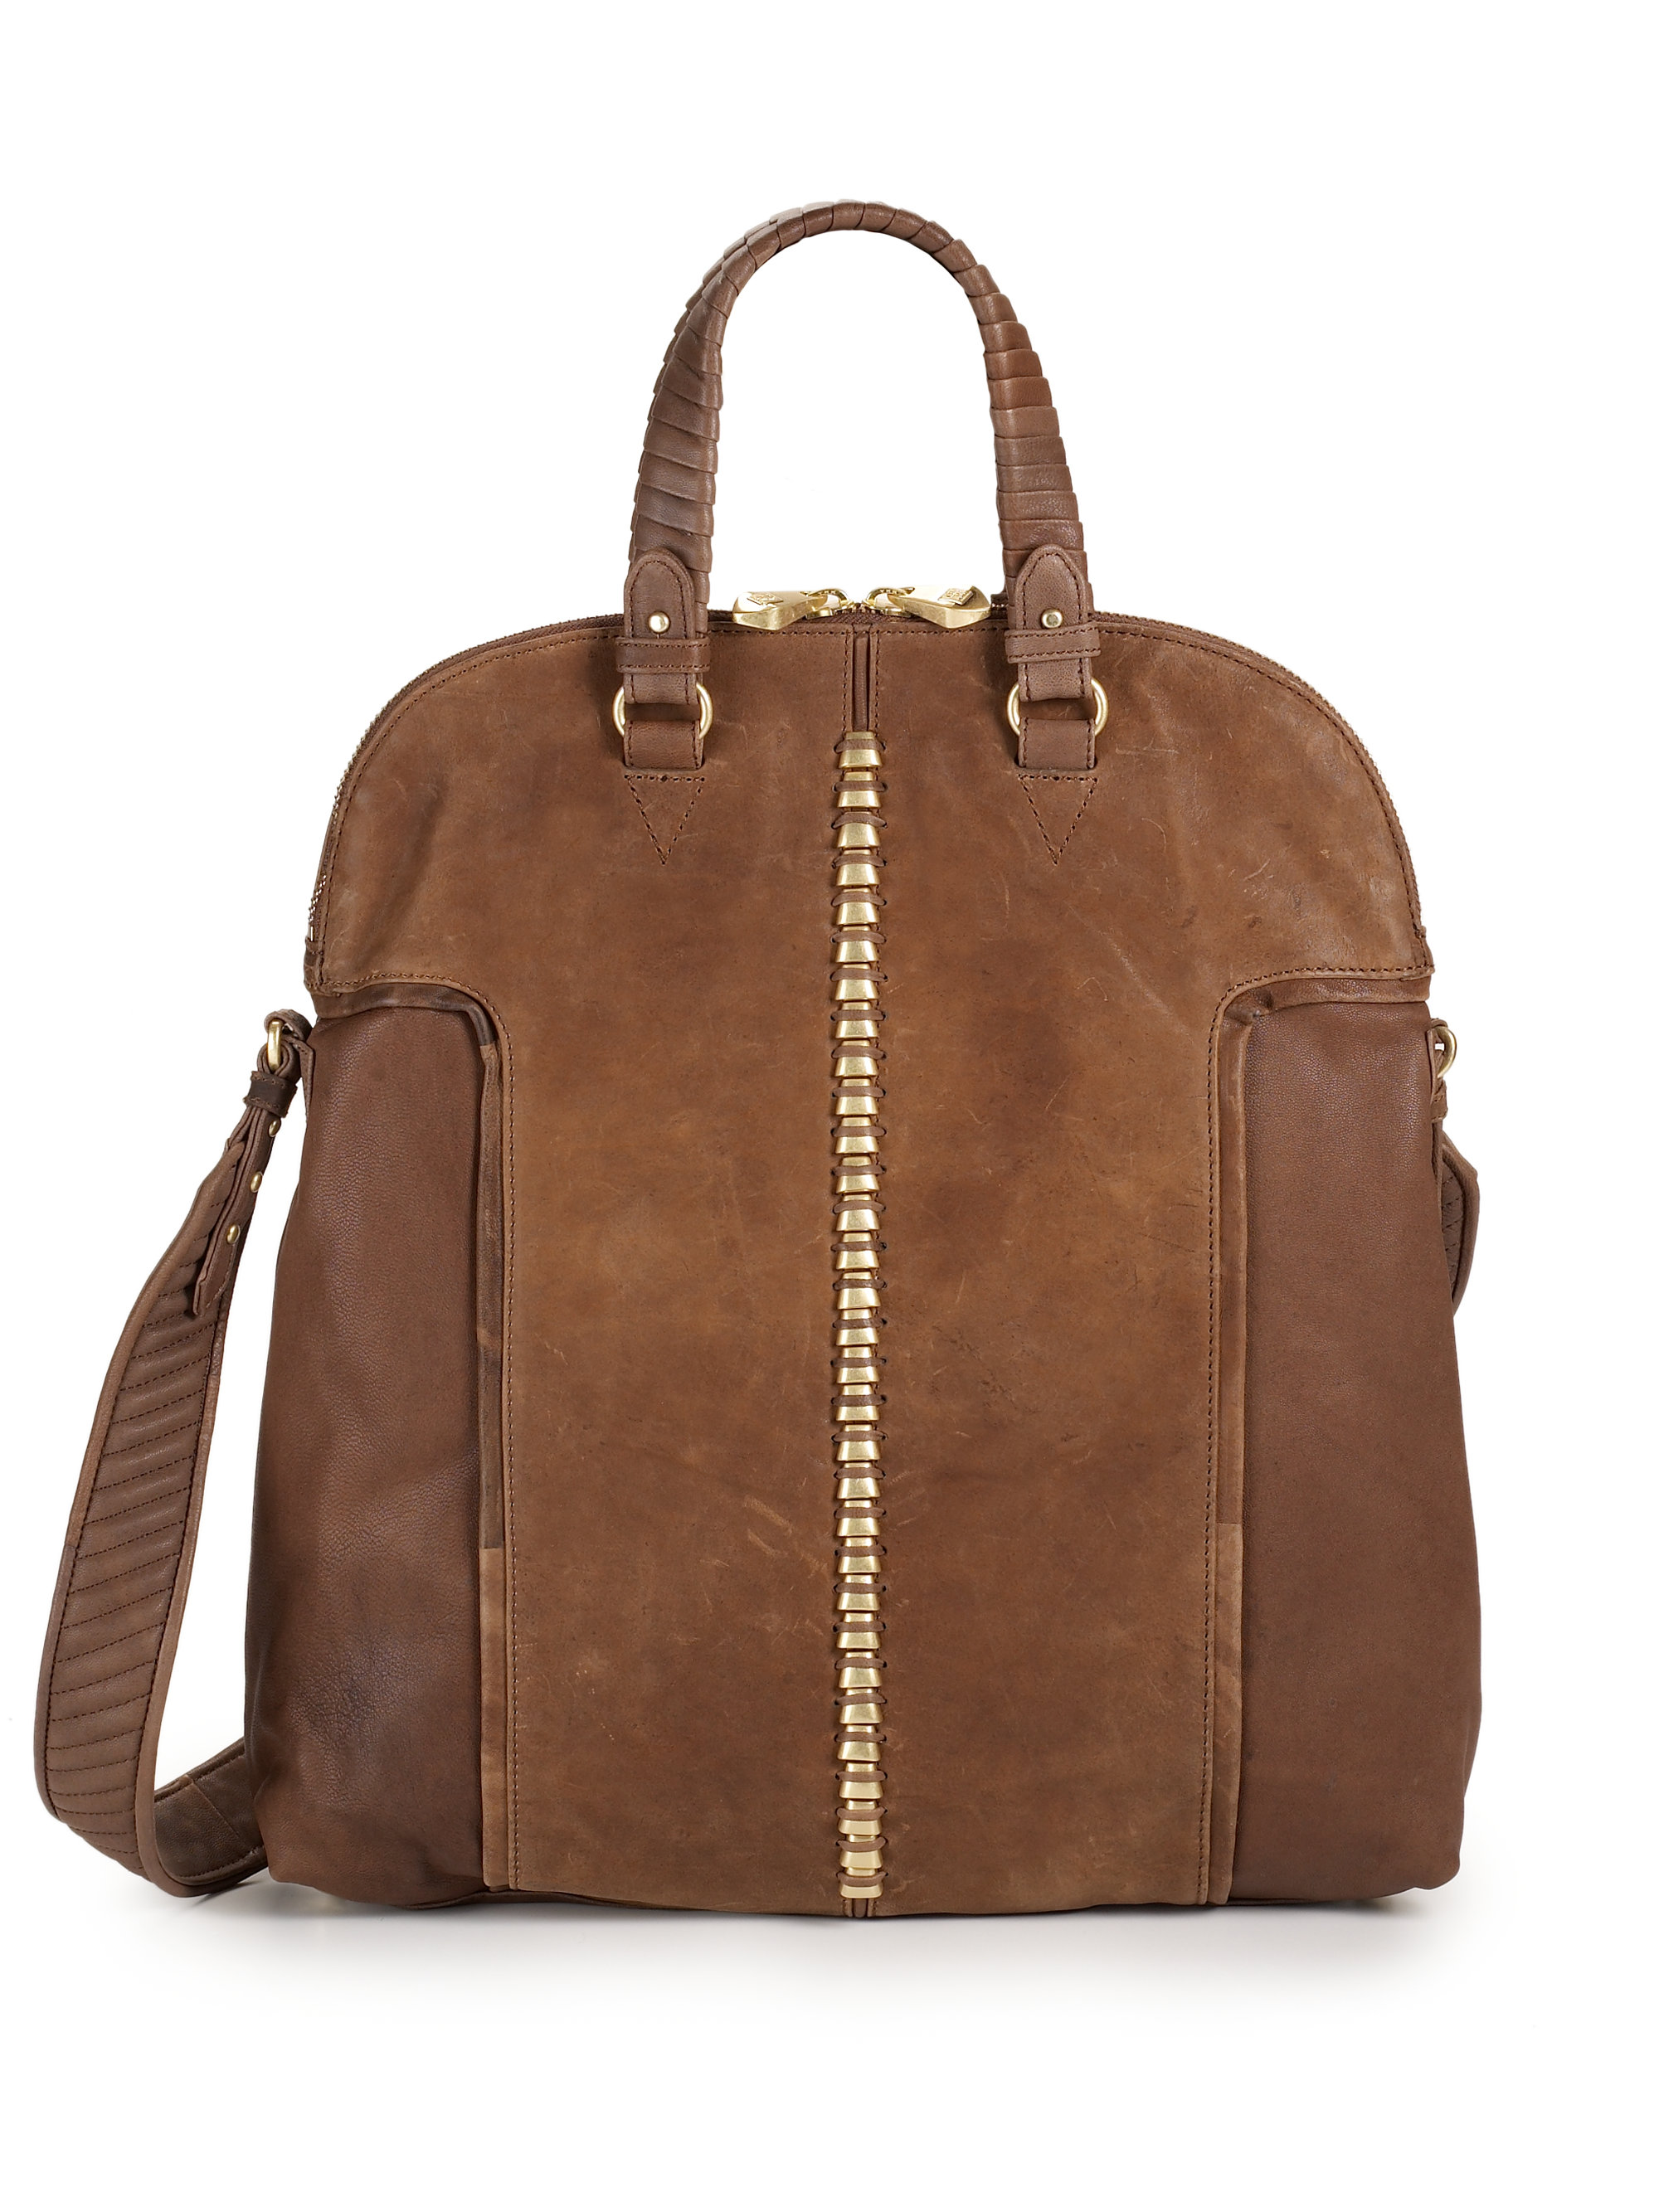 Lyst - Pour La Victoire Toulouse Large Tote Bag in Brown